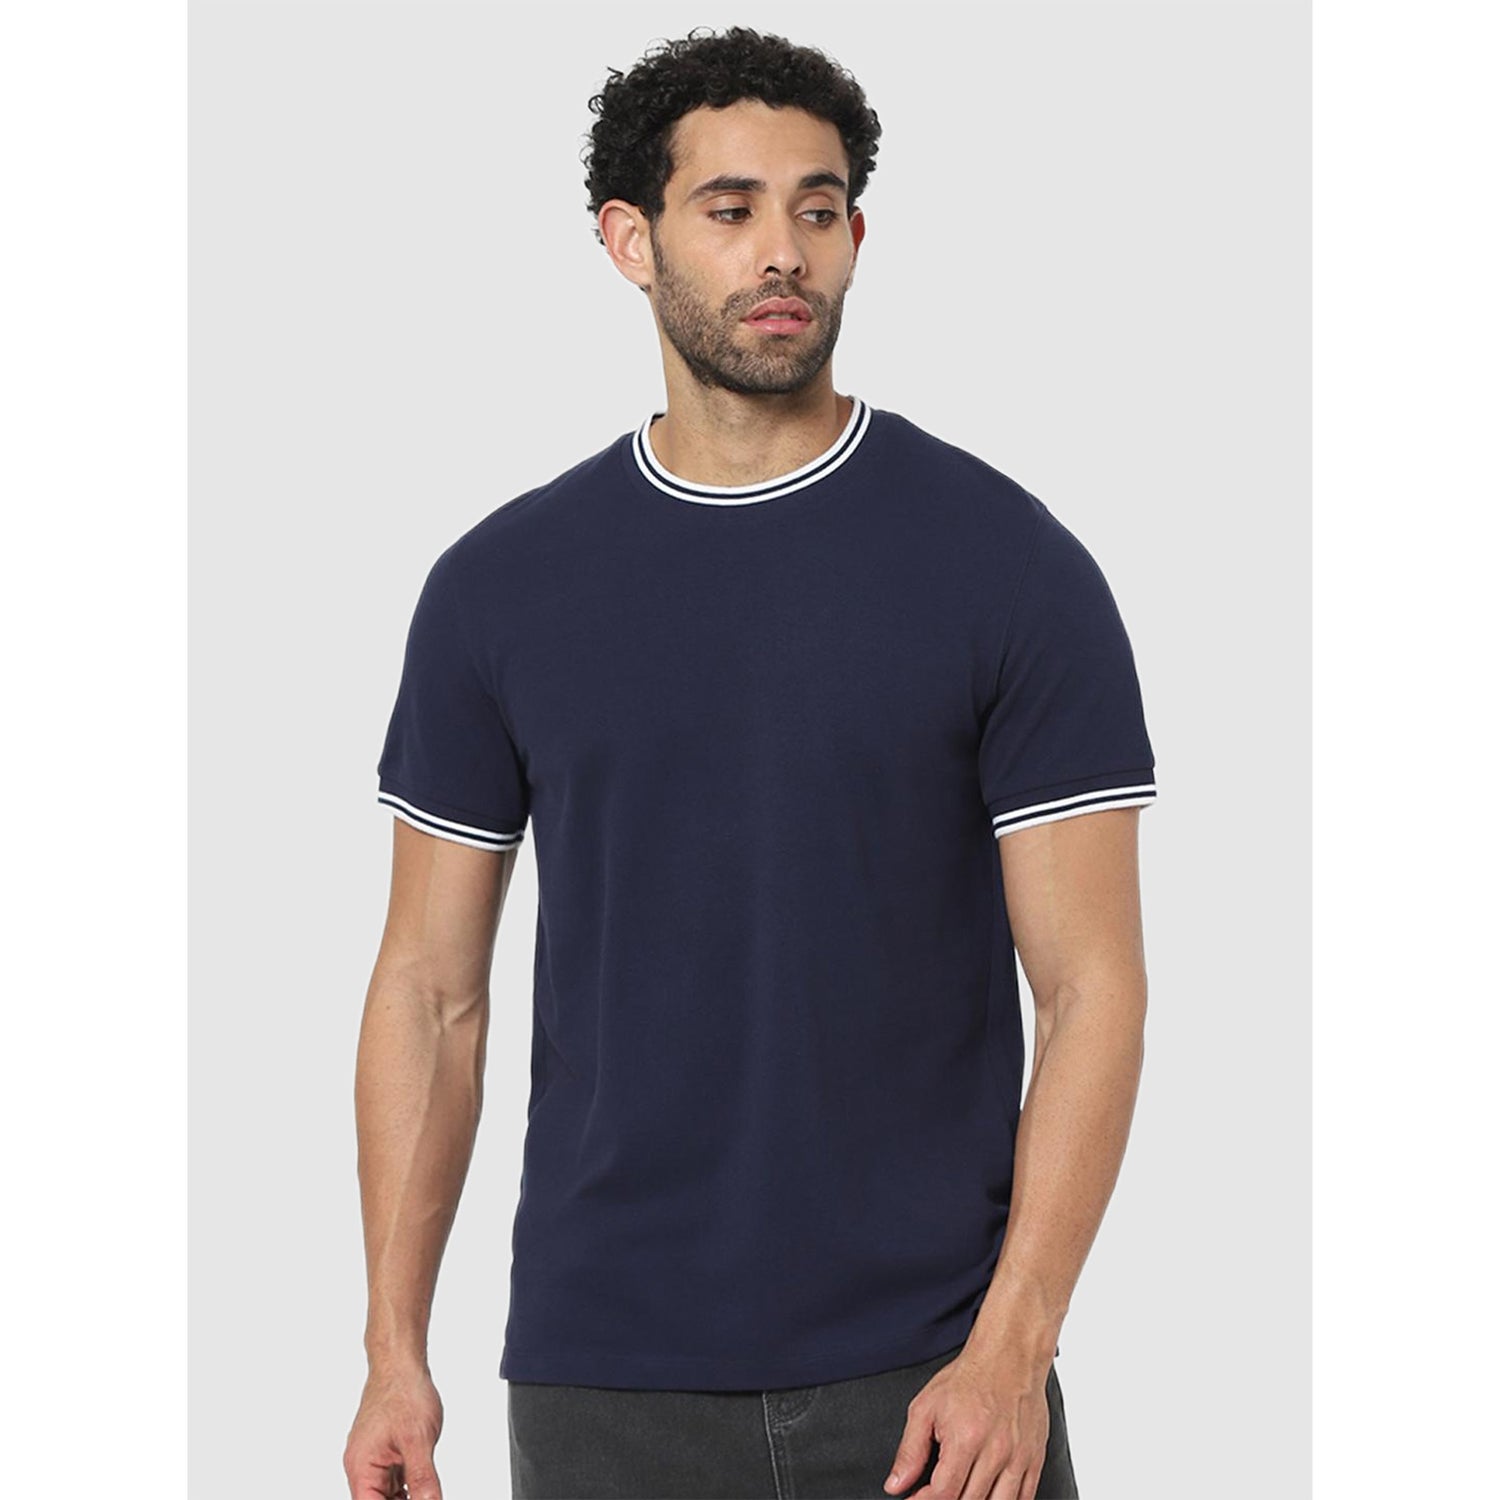 Navy Solid Regular Fit T-Shirt (Various Sizes)